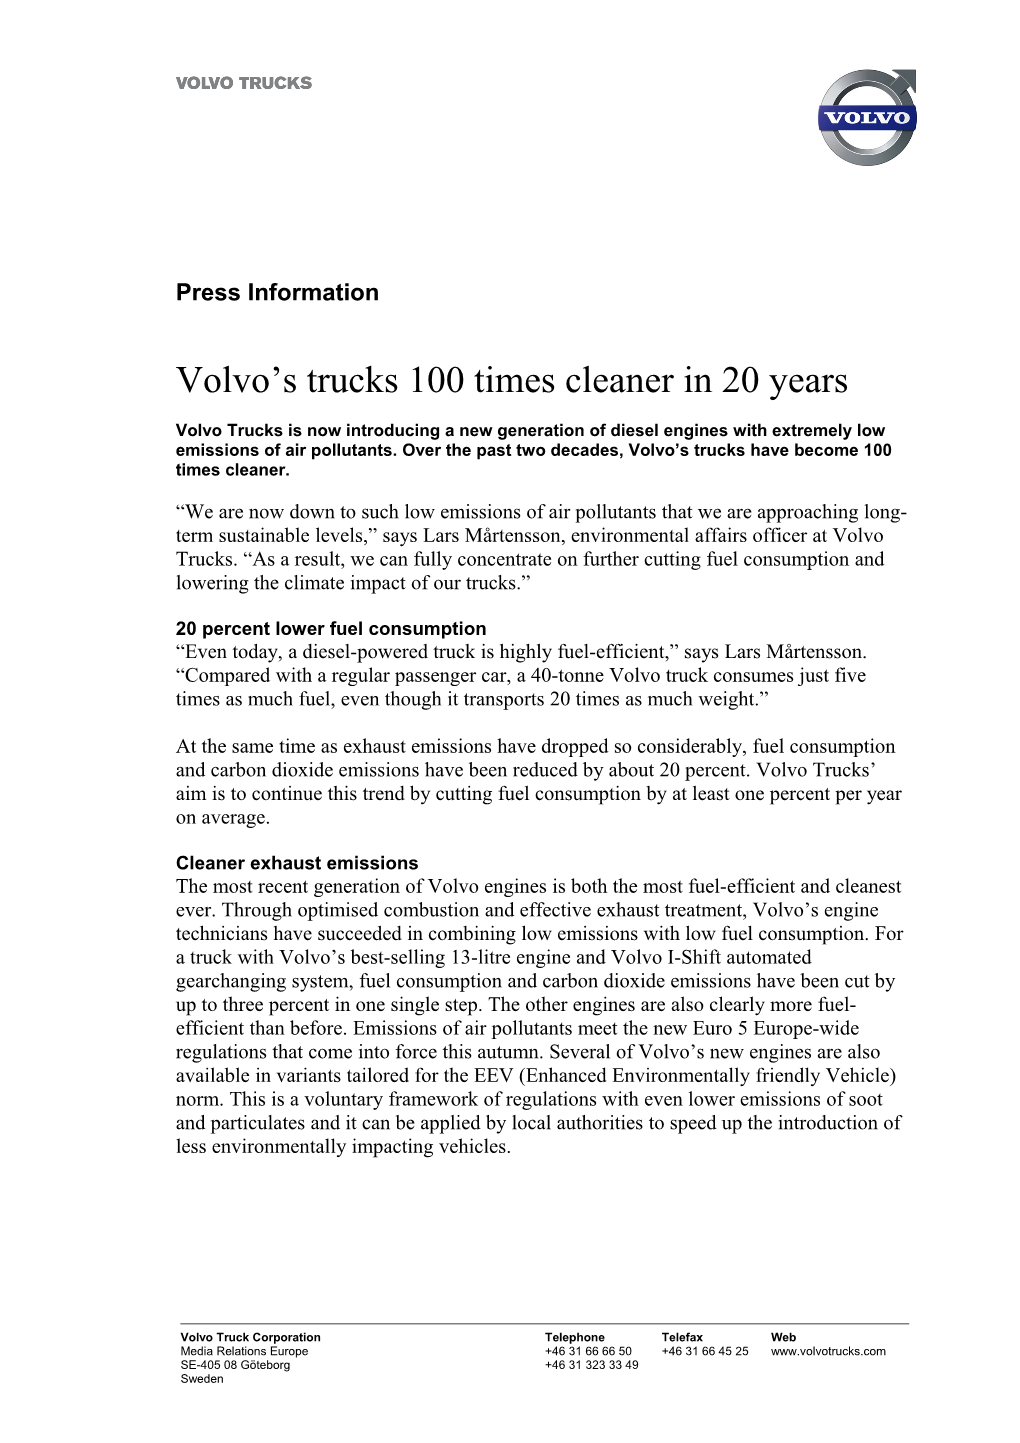 Volvo S Trucks 100 Times Cleaner in 20 Years